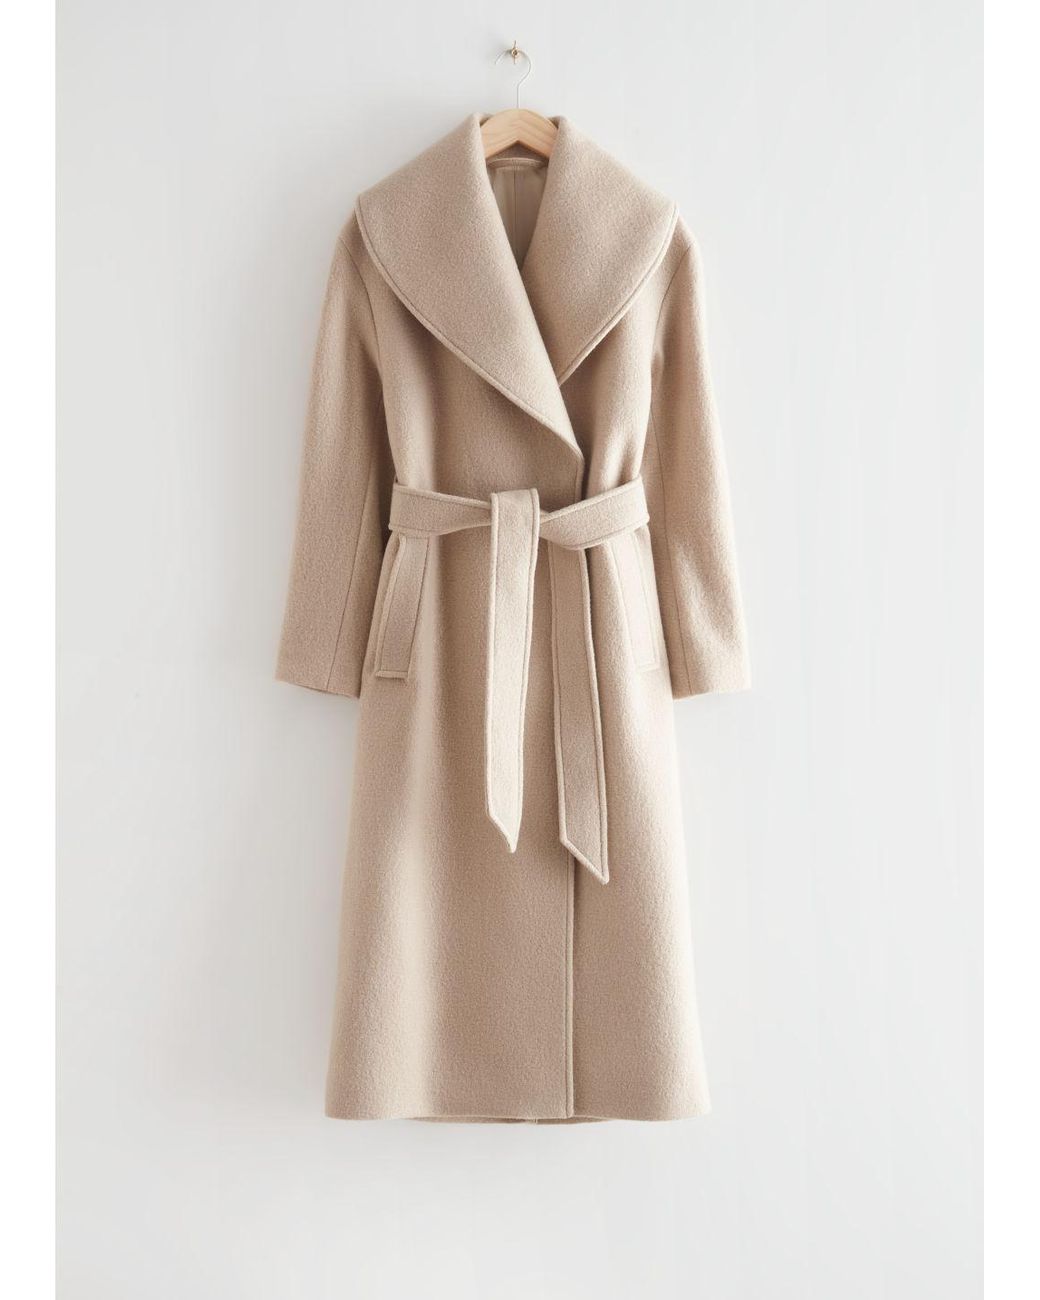 & Other Stories Shawl Collar Wool Coat in Natural | Lyst